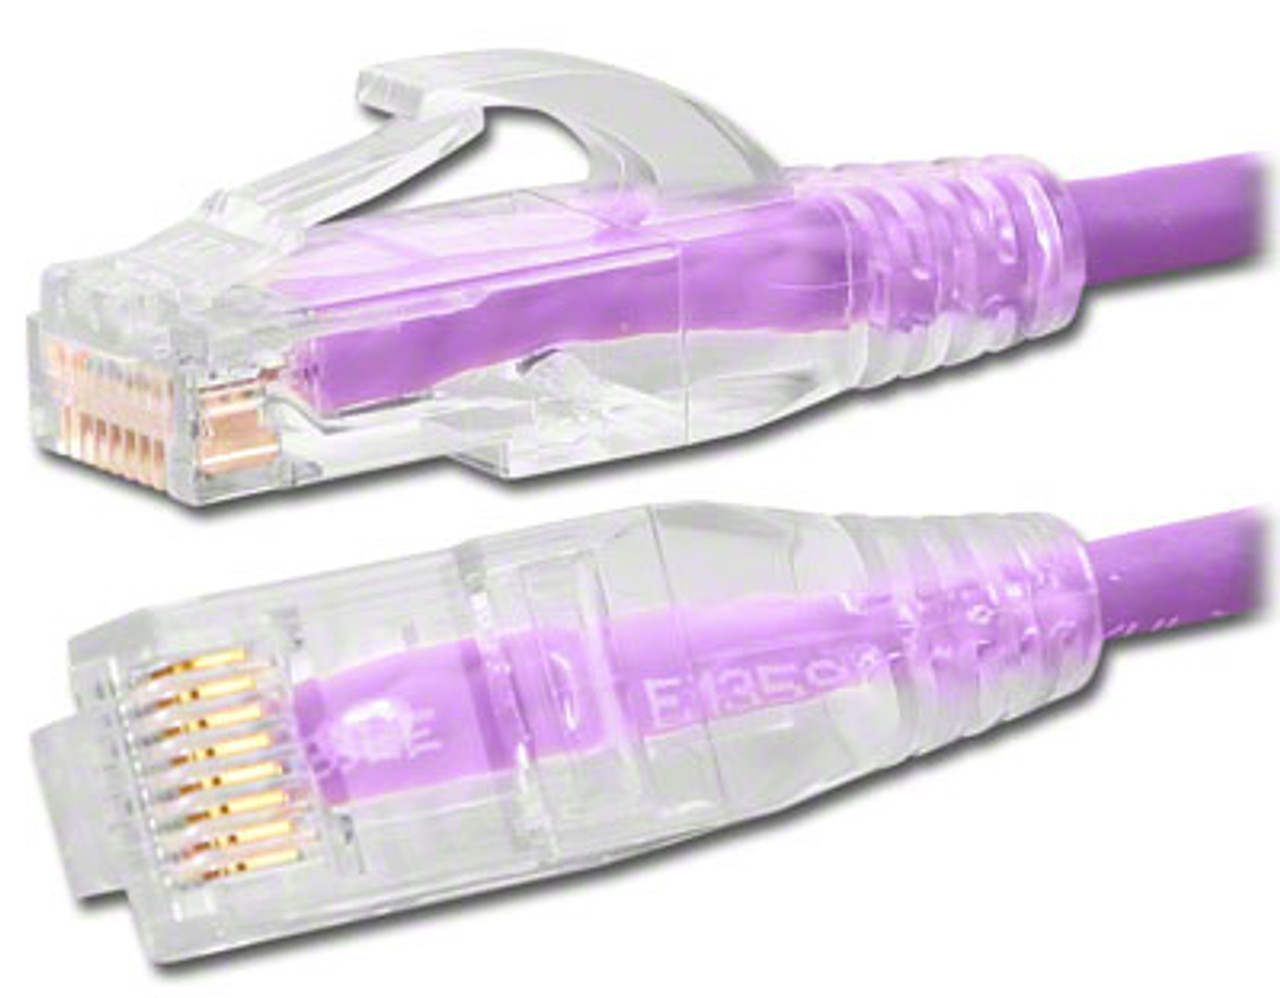 12-Foot - Mini Cat 6 Thin Patch Cable - Violet Jacket - DC-56NP-12VLTB - TMB